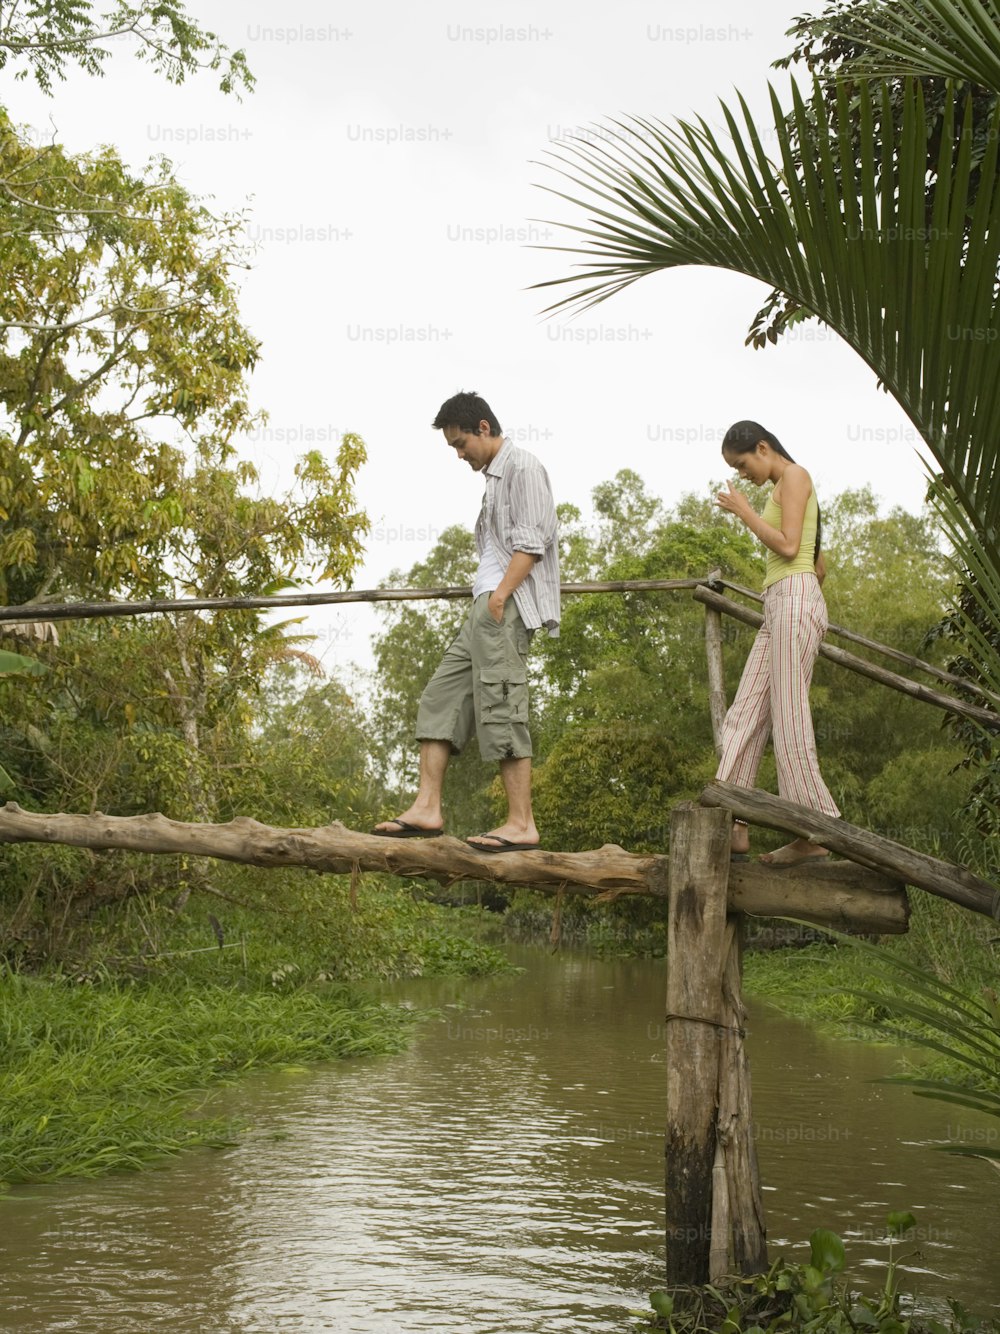 a man and woman walking across a wooden bridge over a river